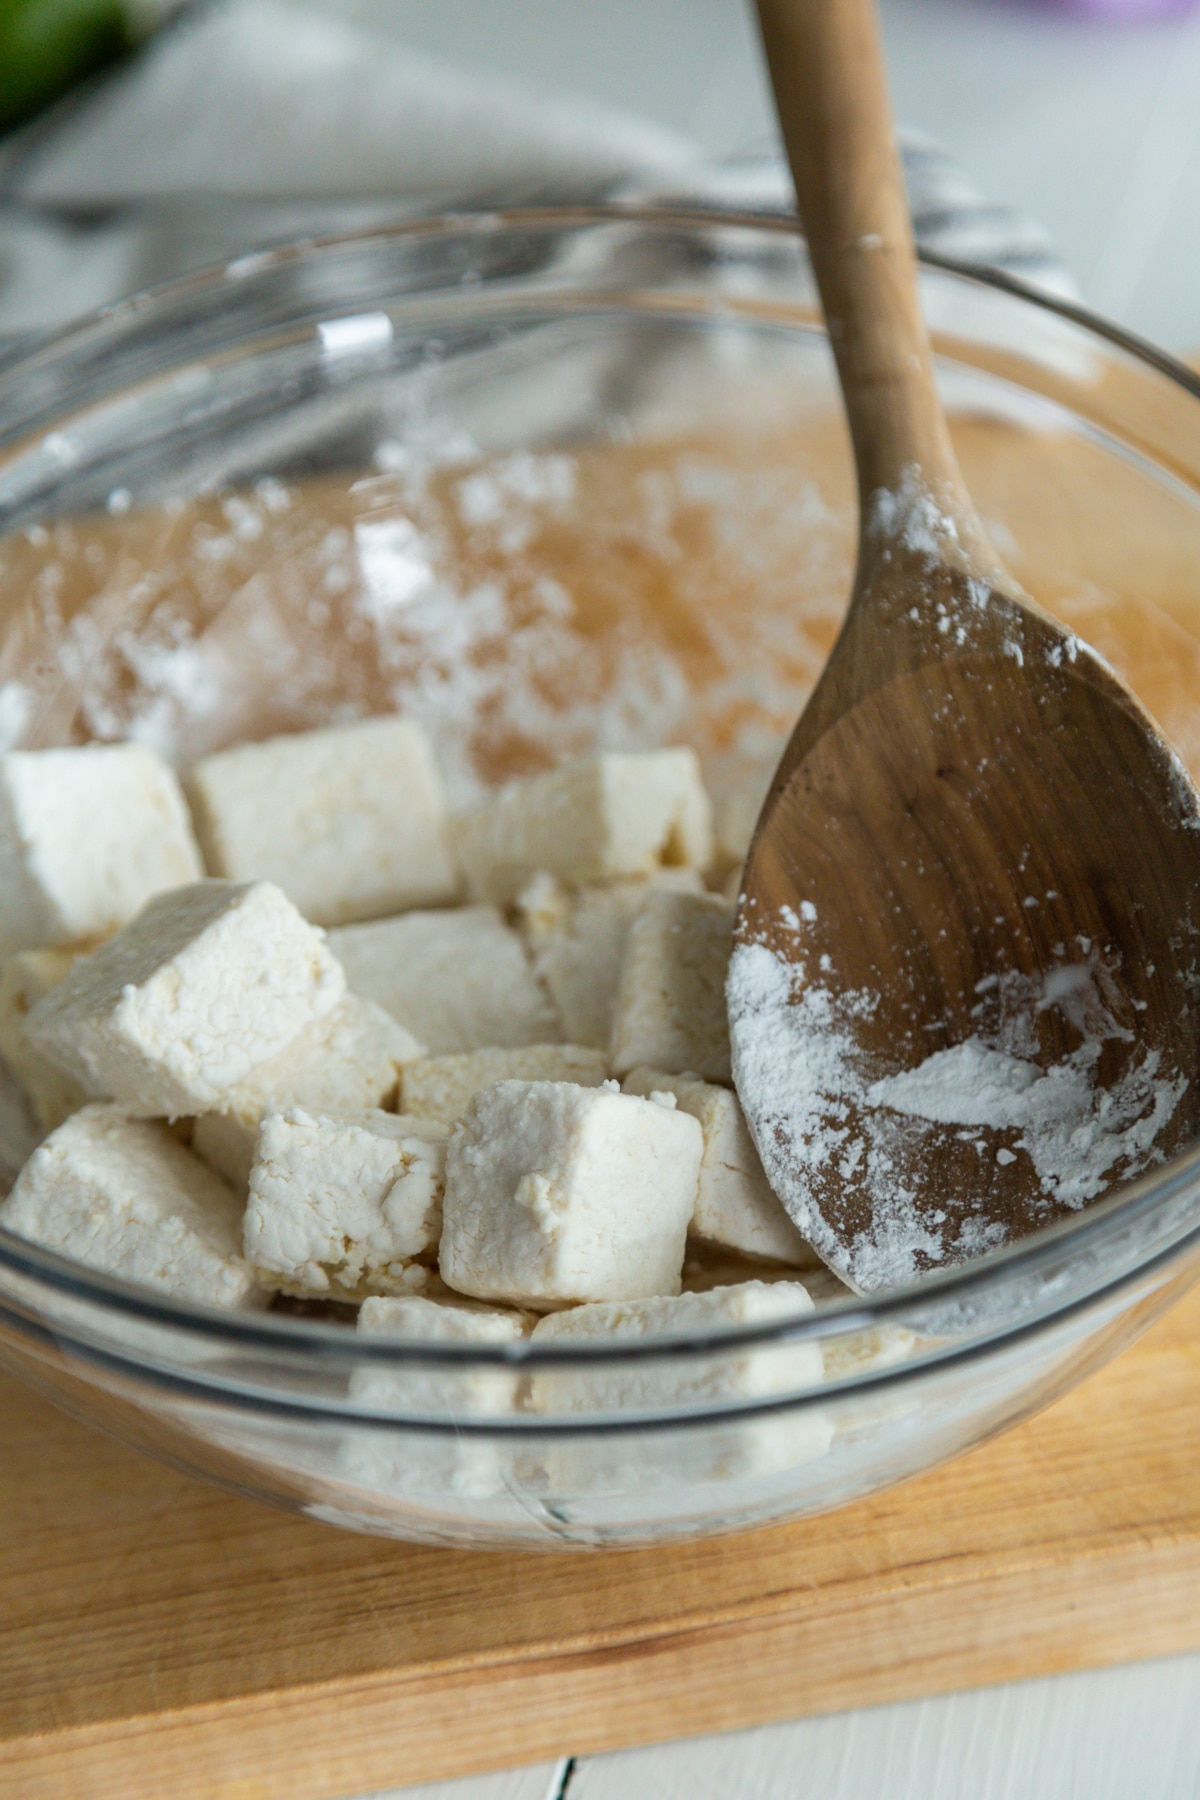 A glass bowl with cubed tofu and corn starch being tossed with a wooden spoon.